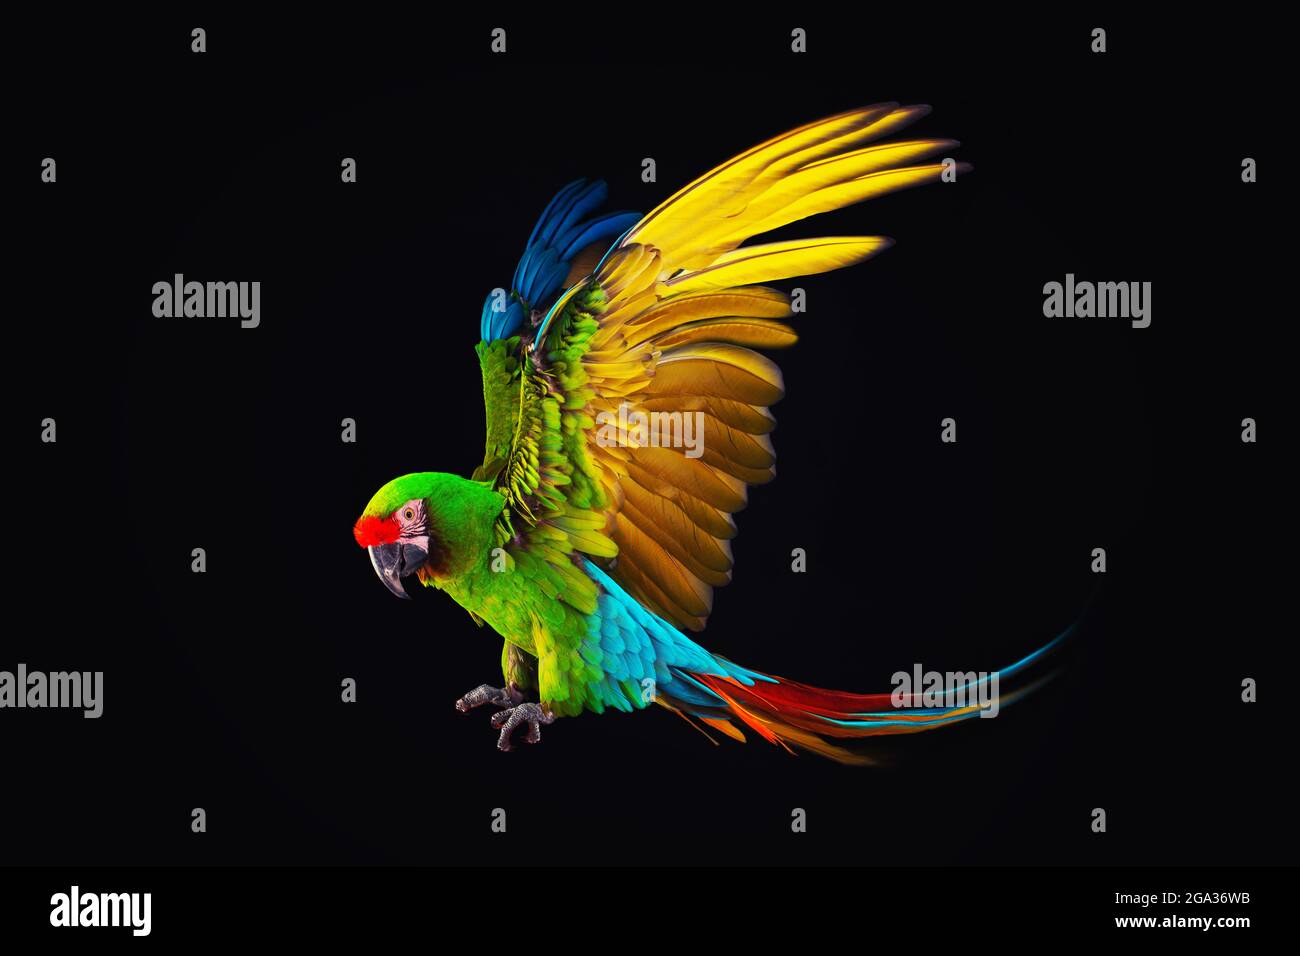 Flying Macaw Parrot isolated on black background Stock Photo